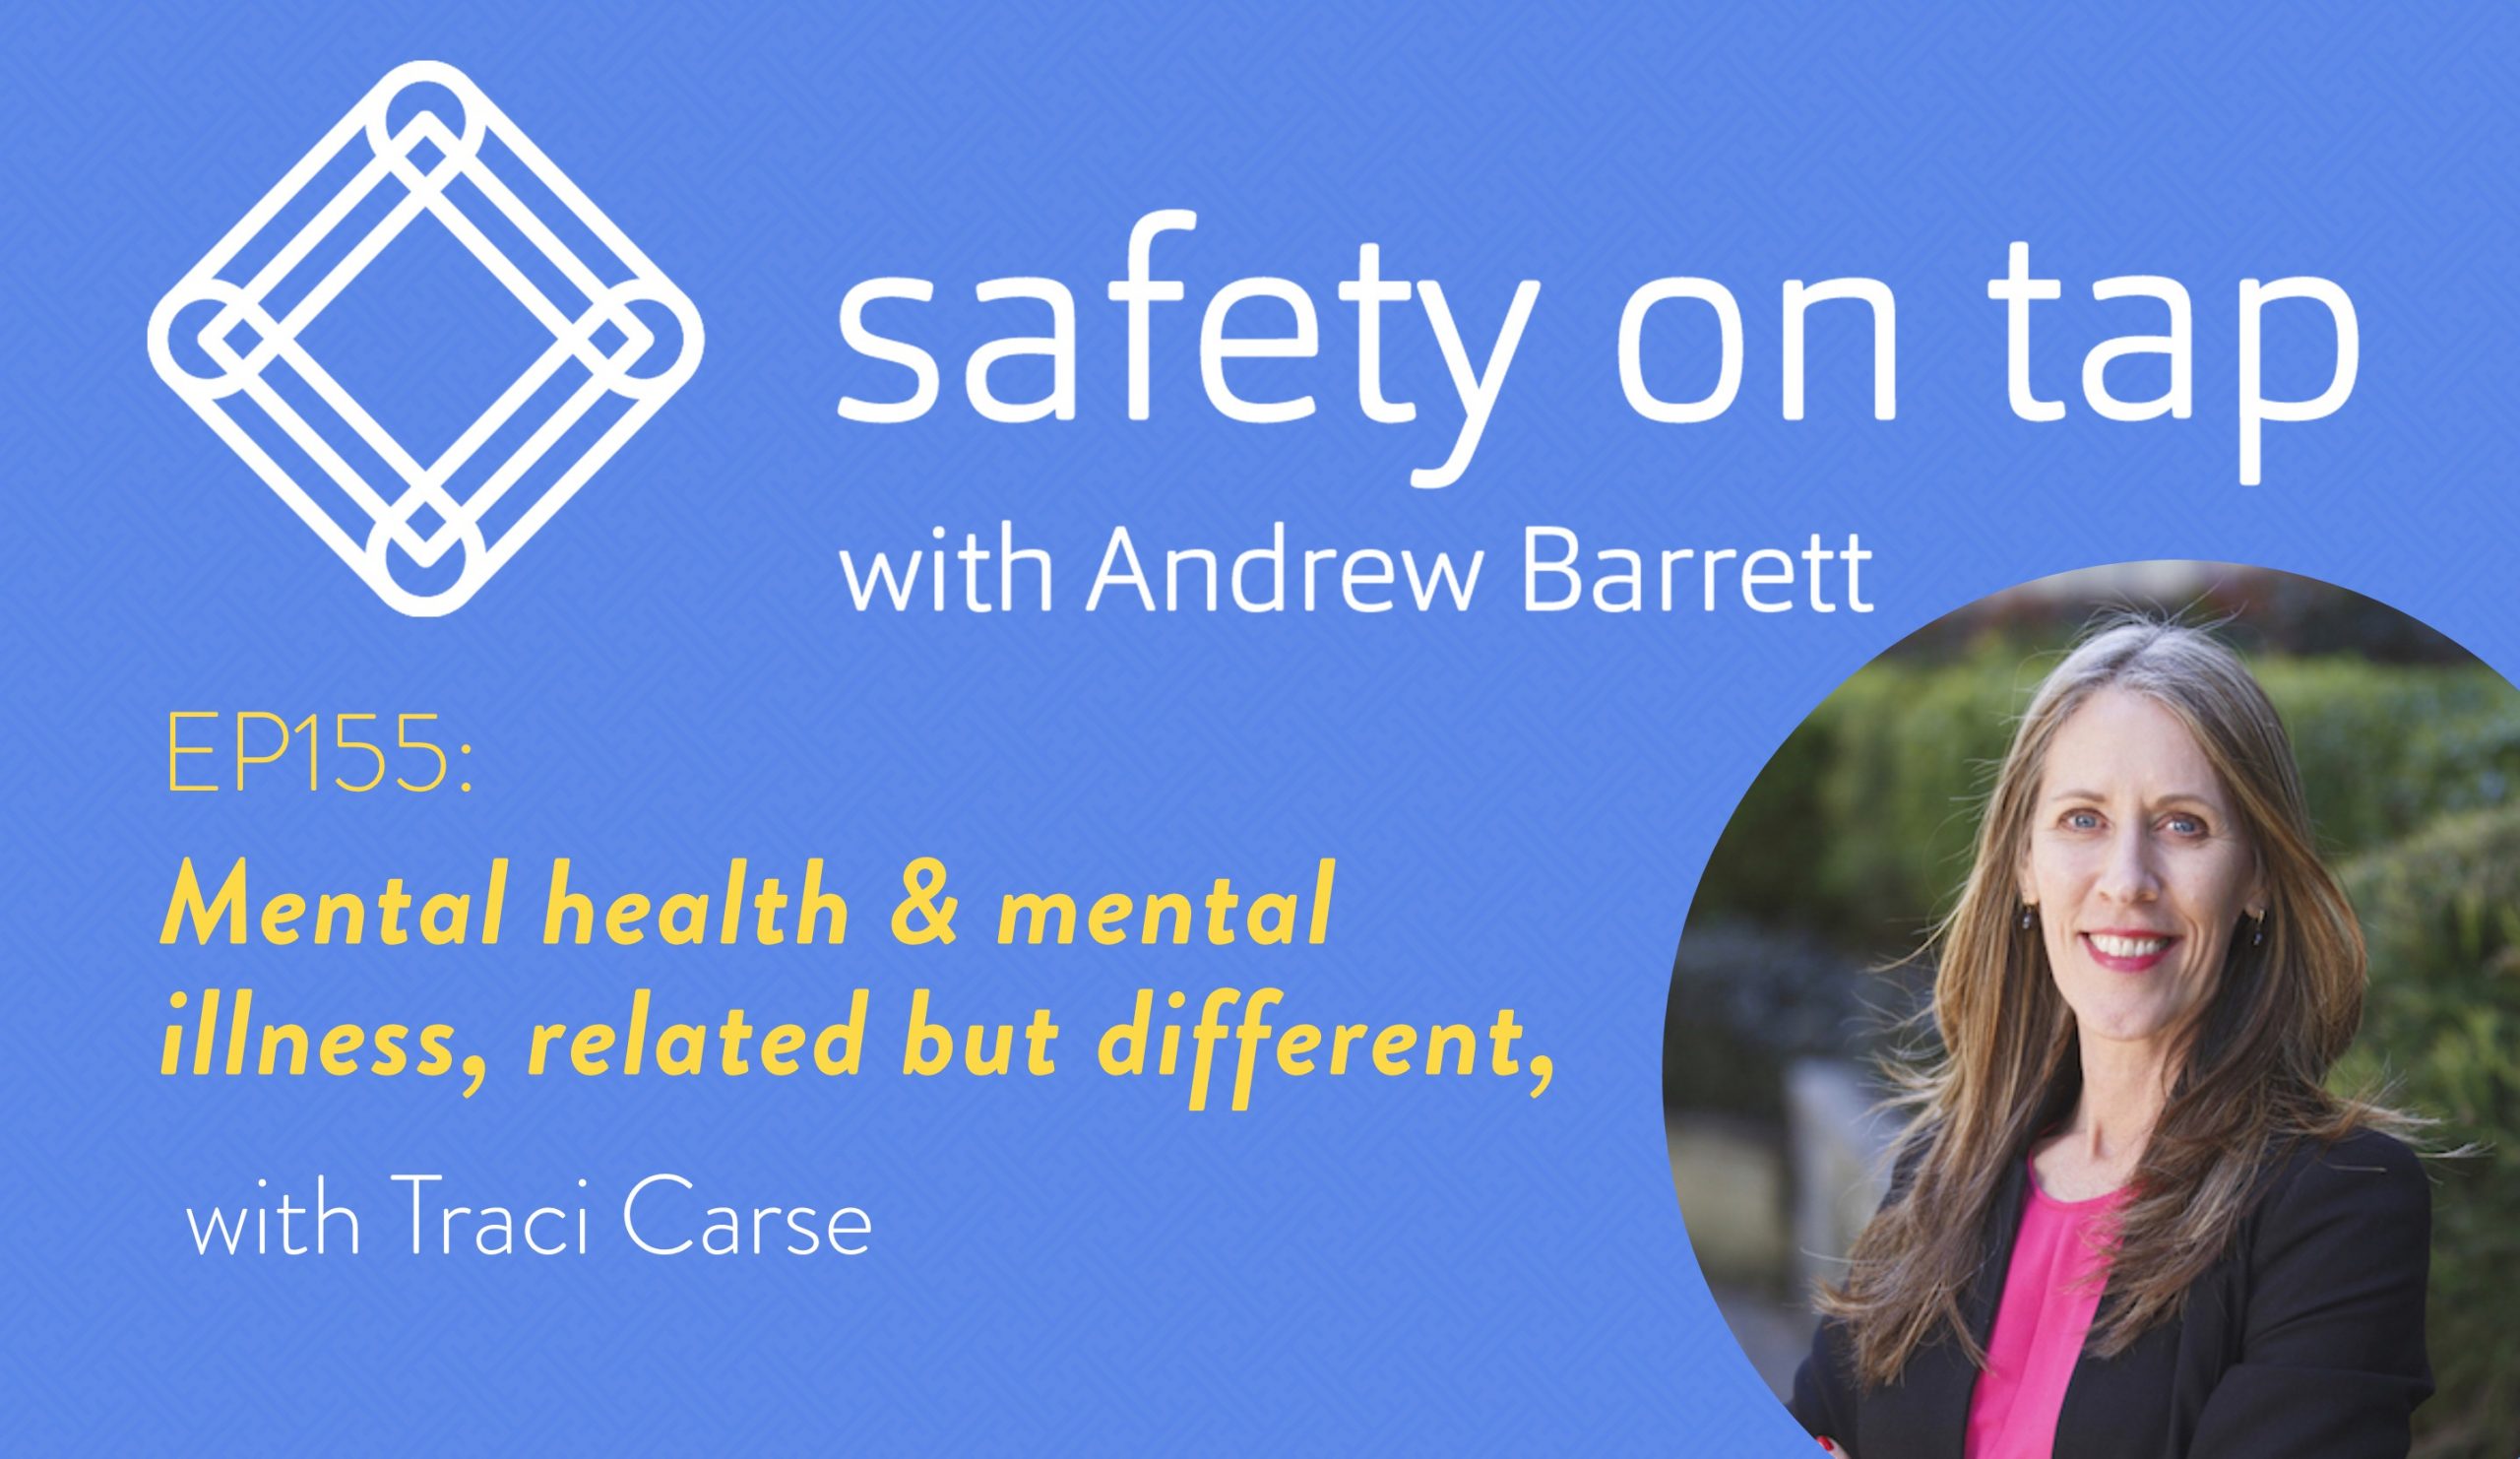 Ep155: Mental health & mental illness, related but different, with Traci Carse